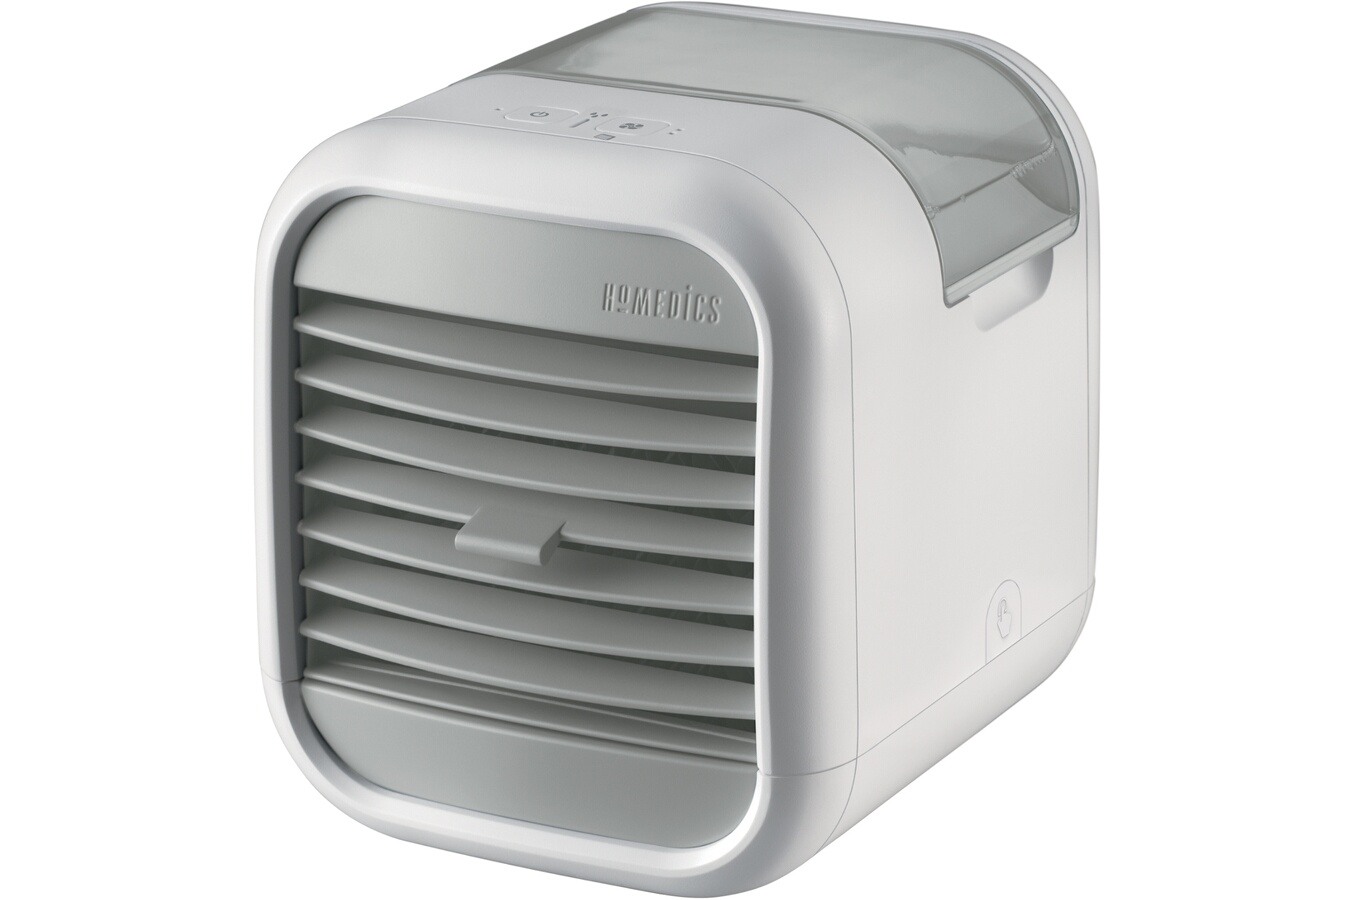 Homedics Personal Space Cooler 2.0 PAC-25